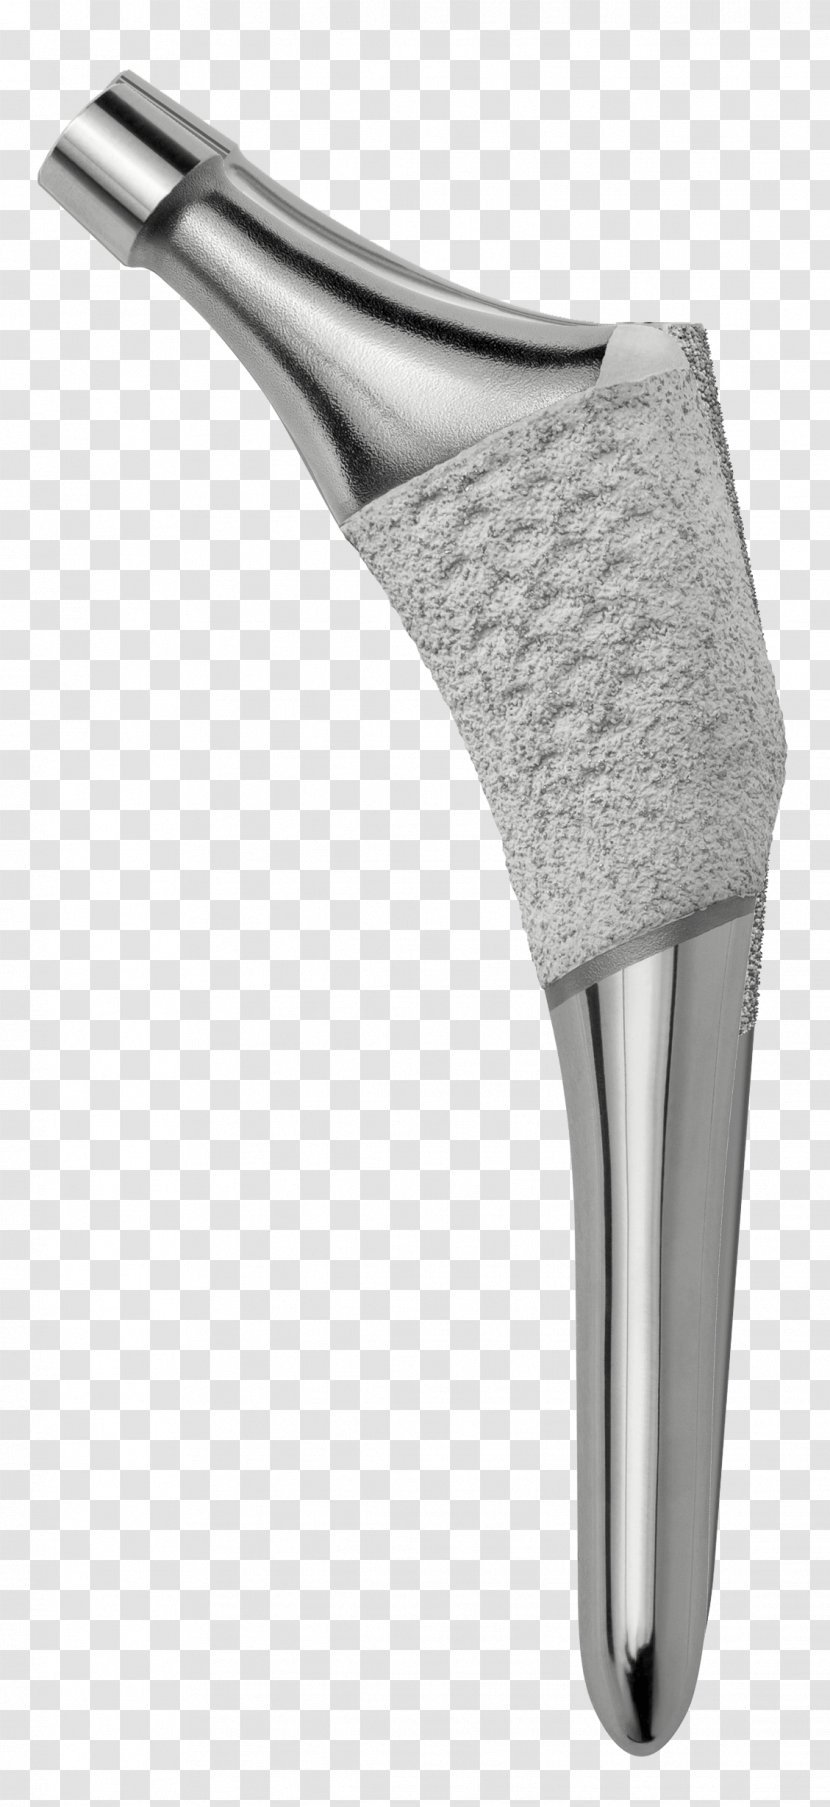 Hip Replacement Implant Femur Itsourtree.com - Brush - Implants Transparent PNG